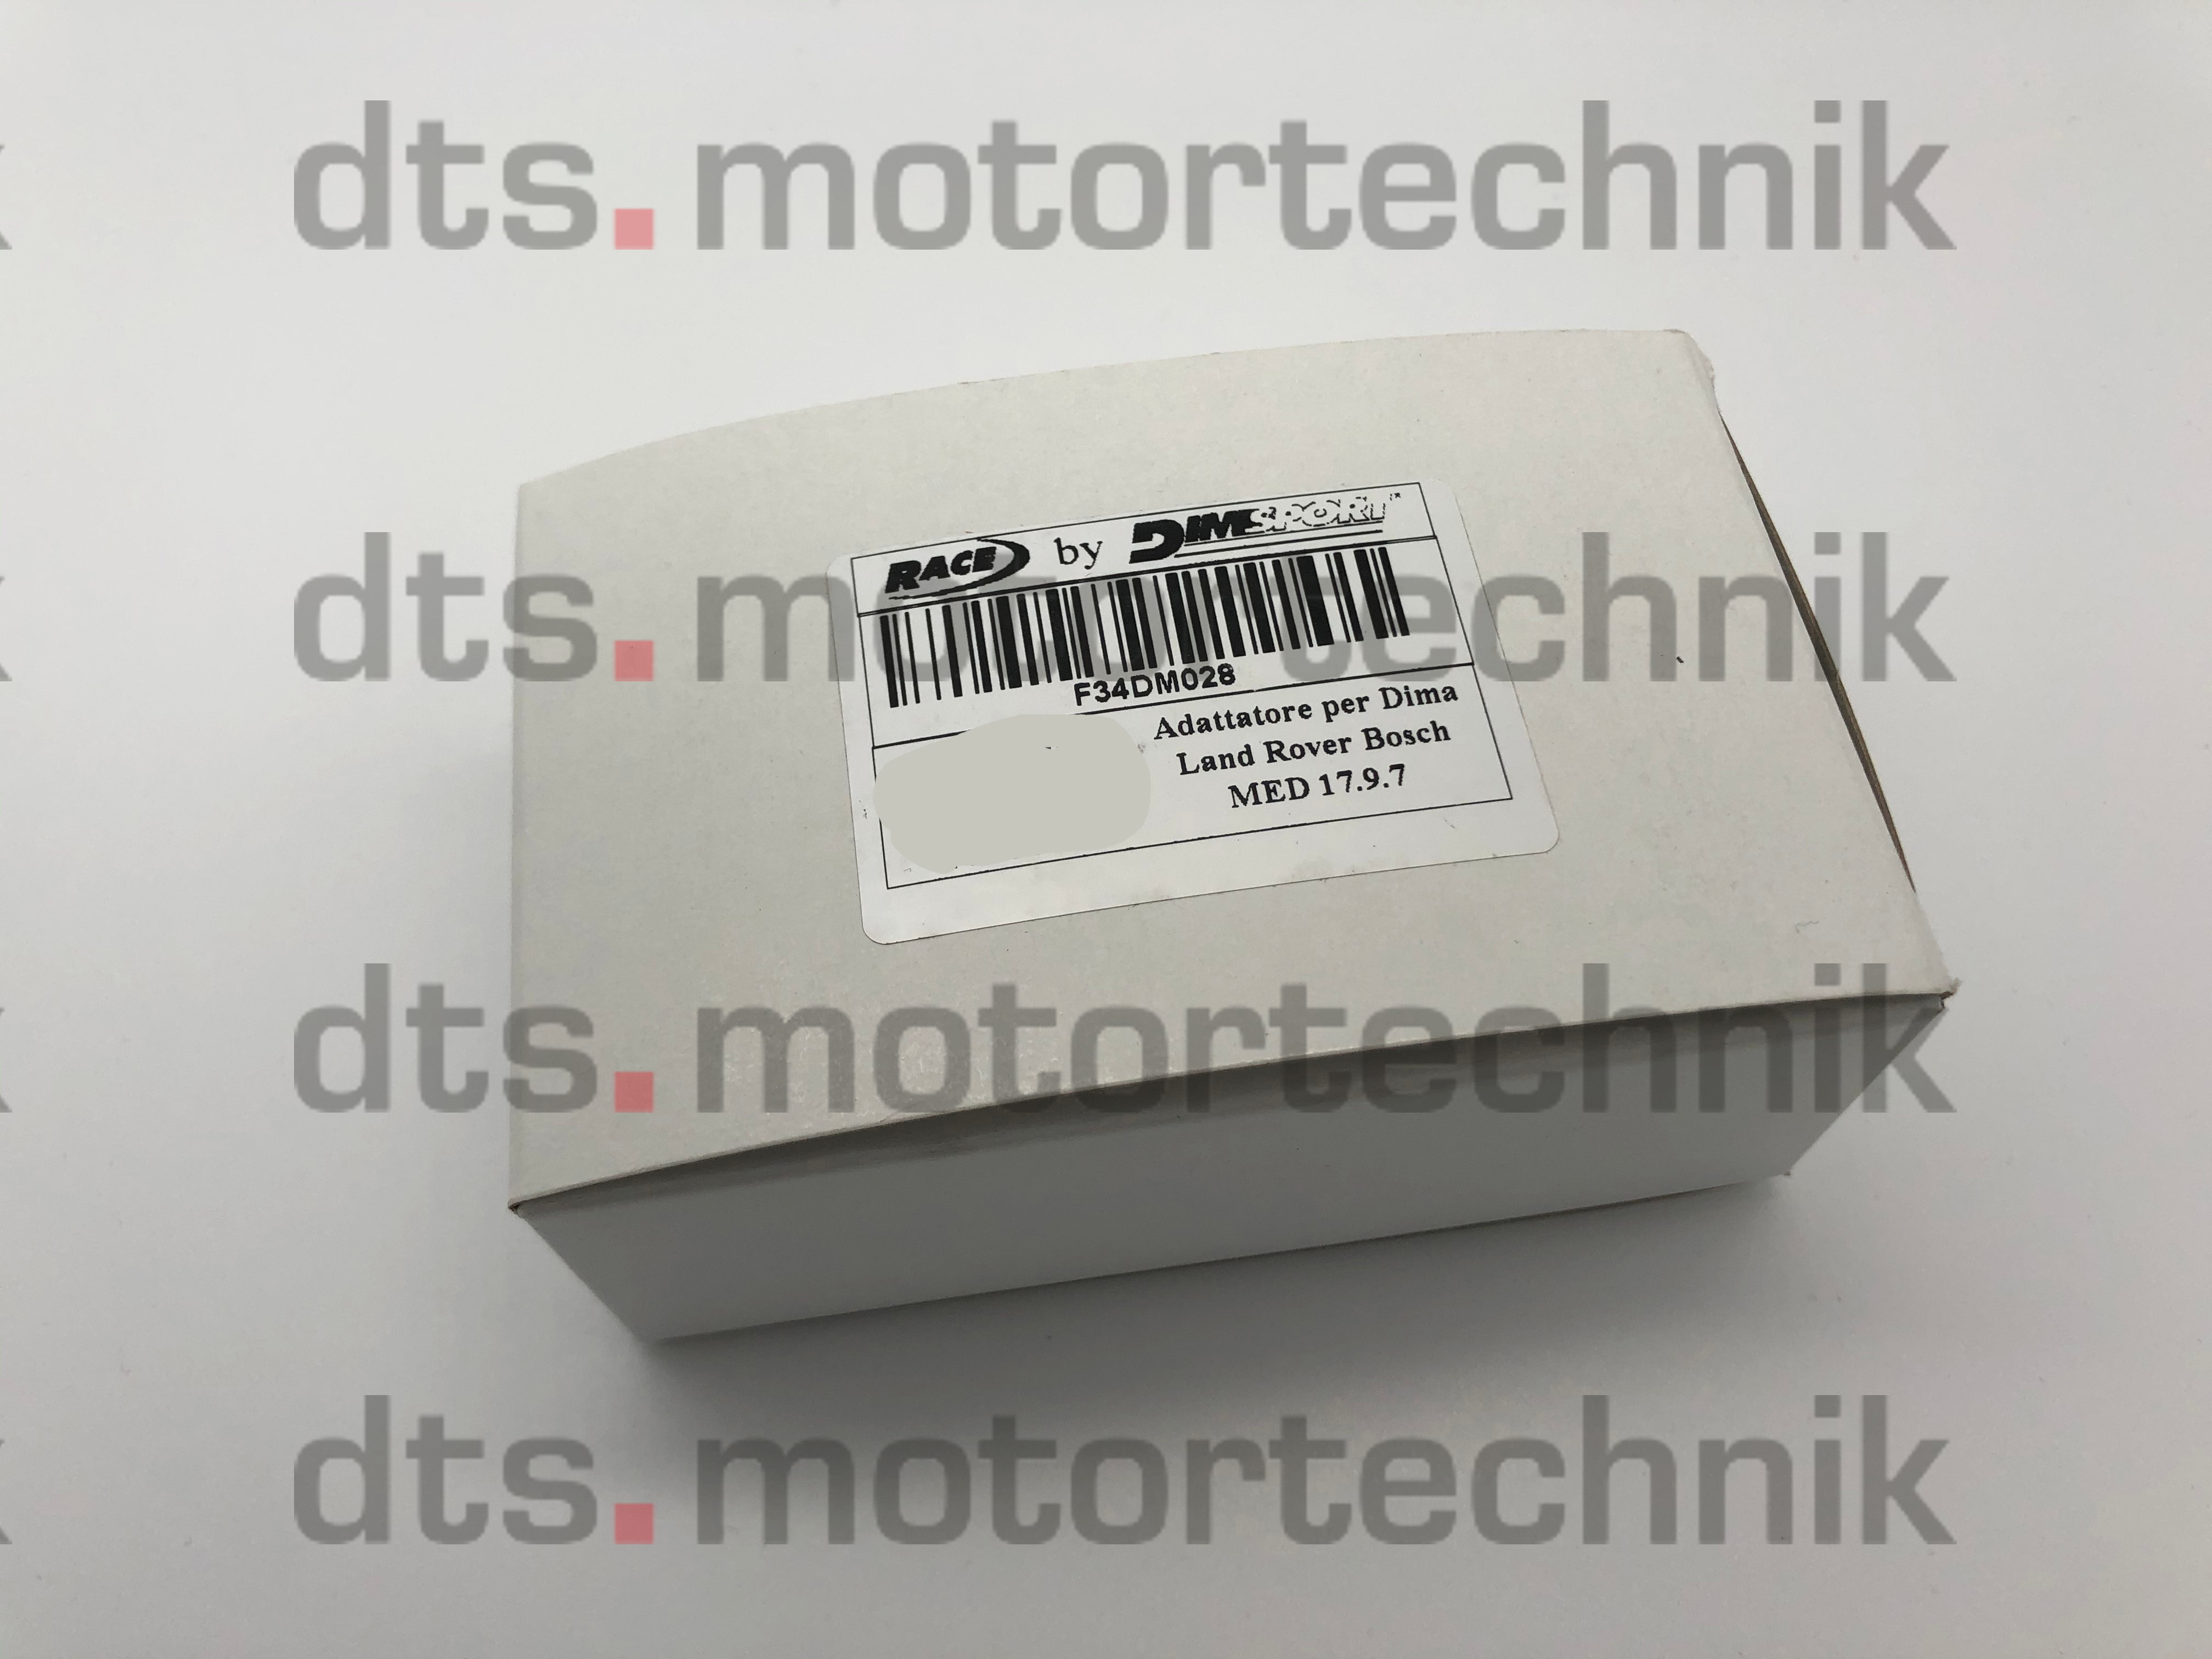 Bosch MED17.9.7 (Land Rover) - Infineon Tricore CPU Terminaladapter